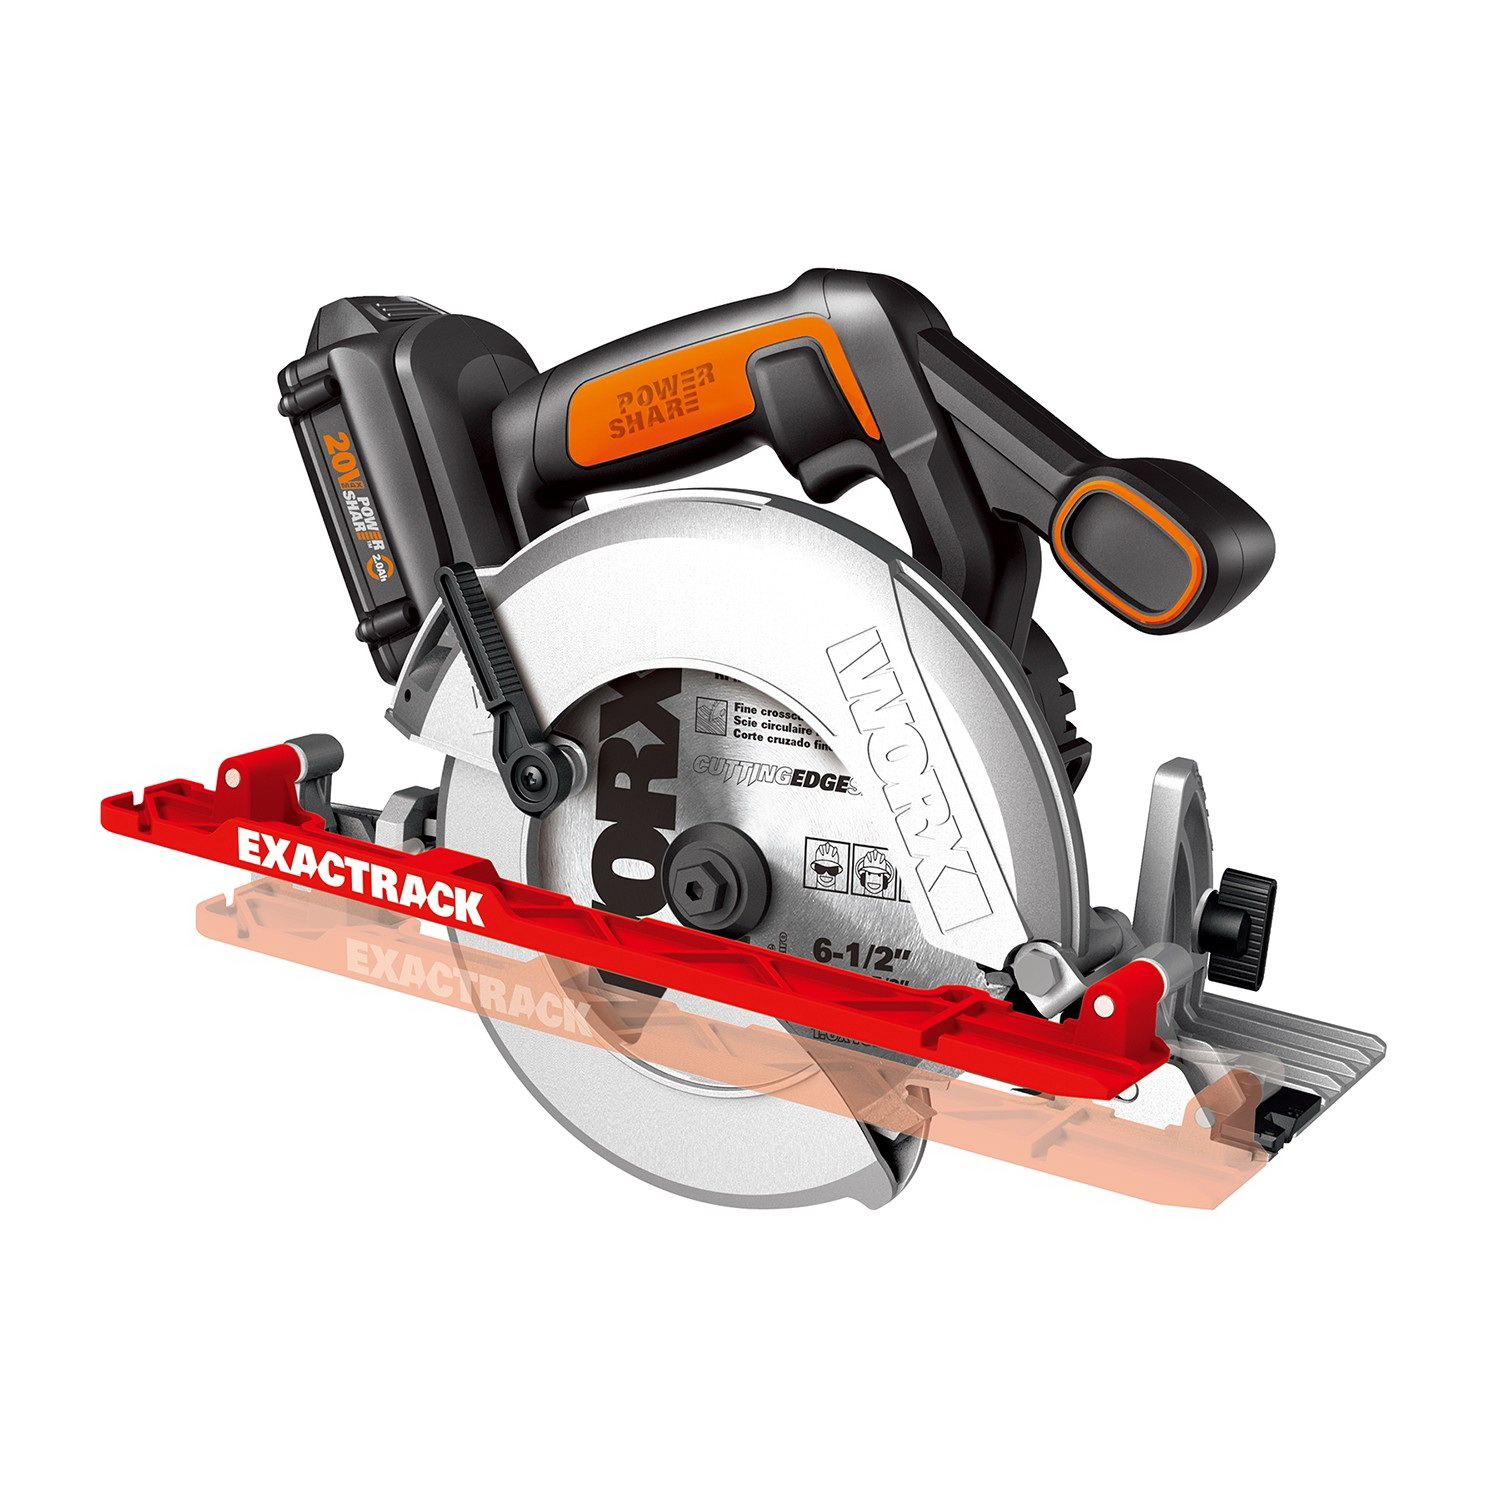 WX530L Circular Saw, Battery Included, 20 V, 6-1/2 in Dia Blade, 0 to 50 deg Bevel